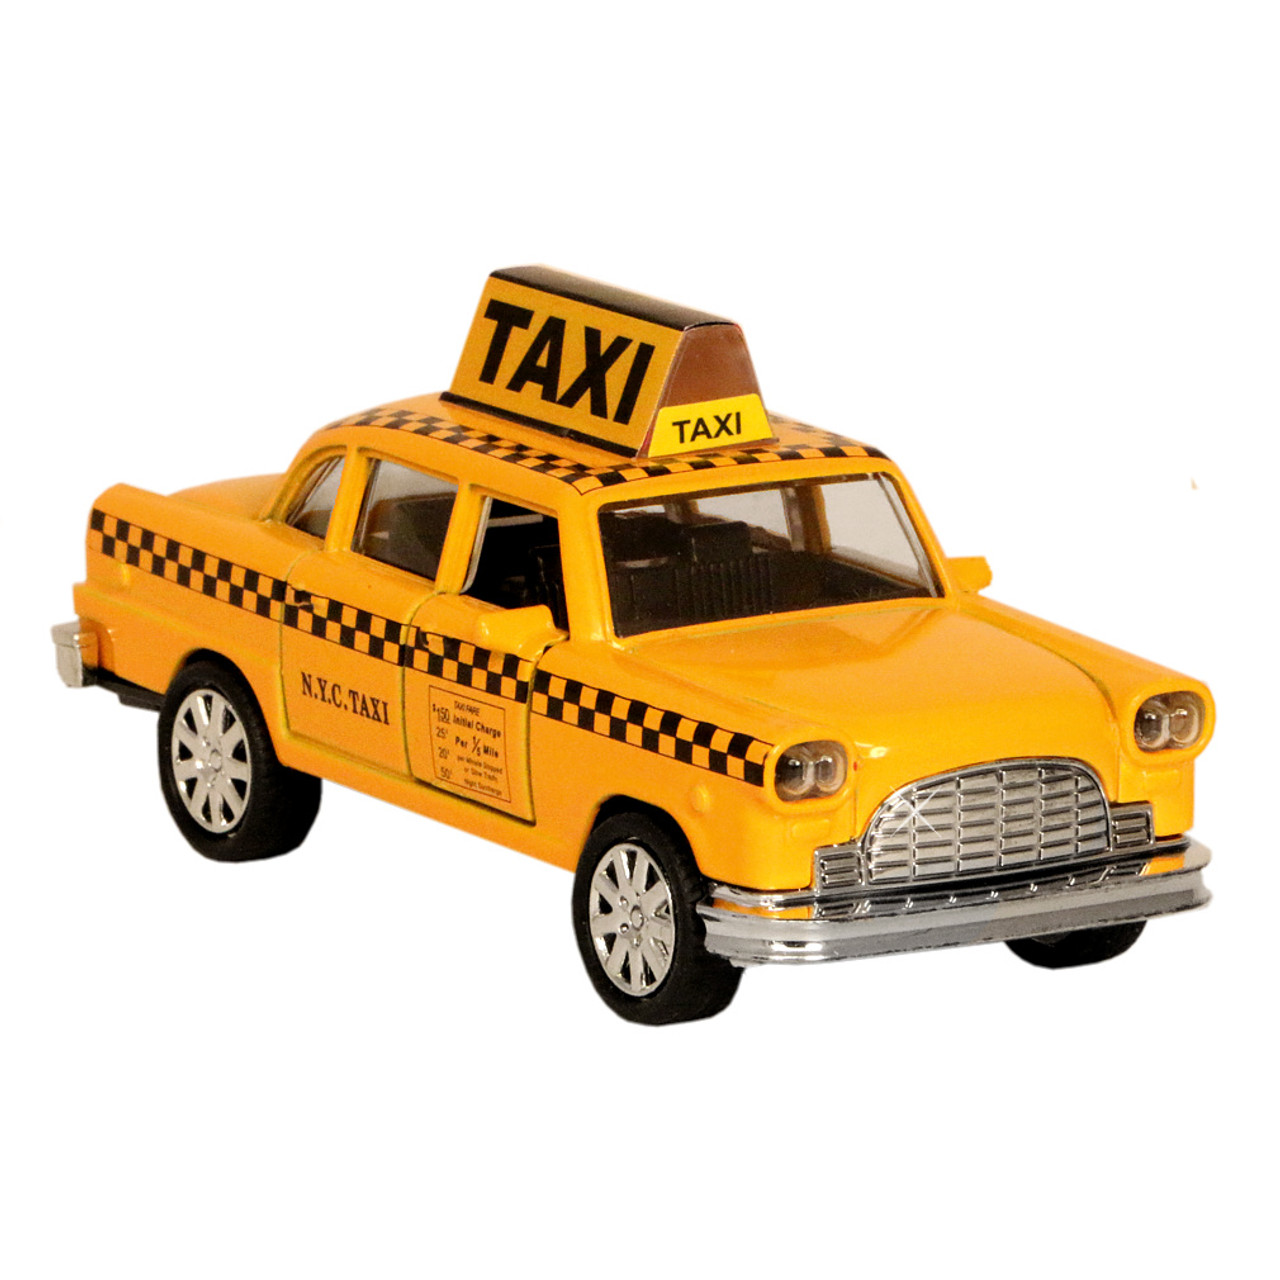 Car　and　City　Taxi　Souvenir　Holders　Place　Card　New　York